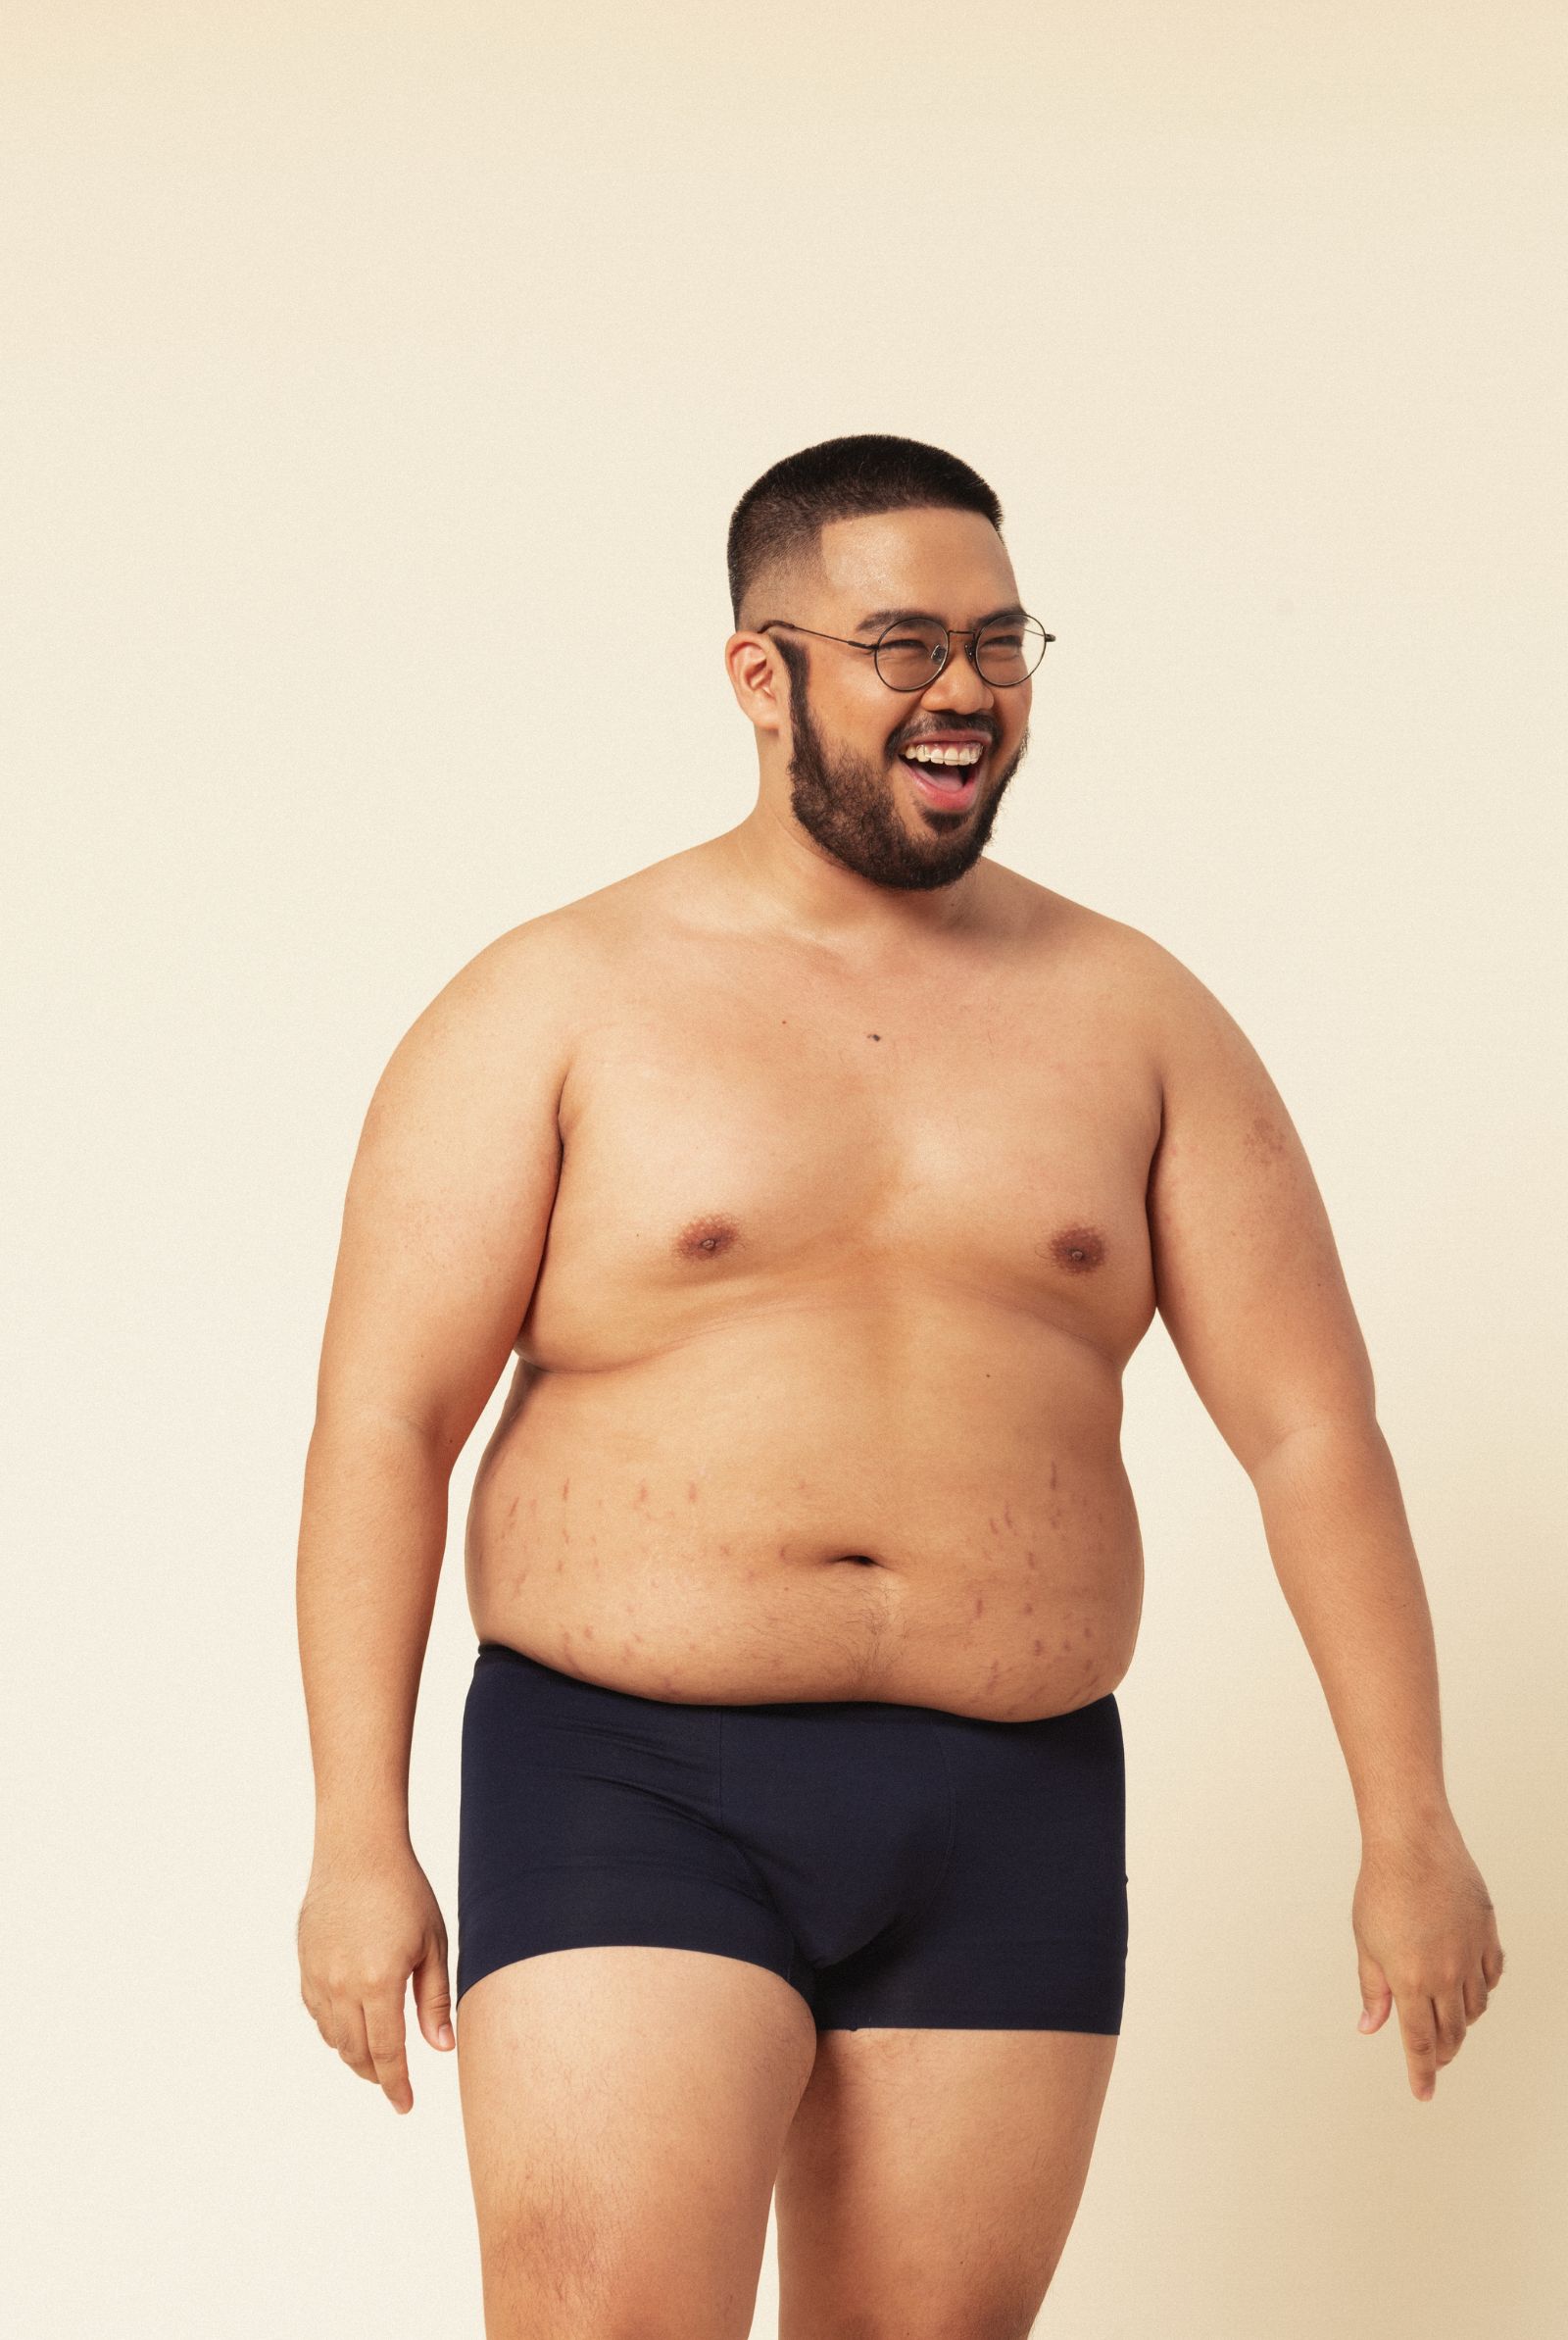 Here's What 'Real' Men Would Look Like If They Posed As Underwear Models